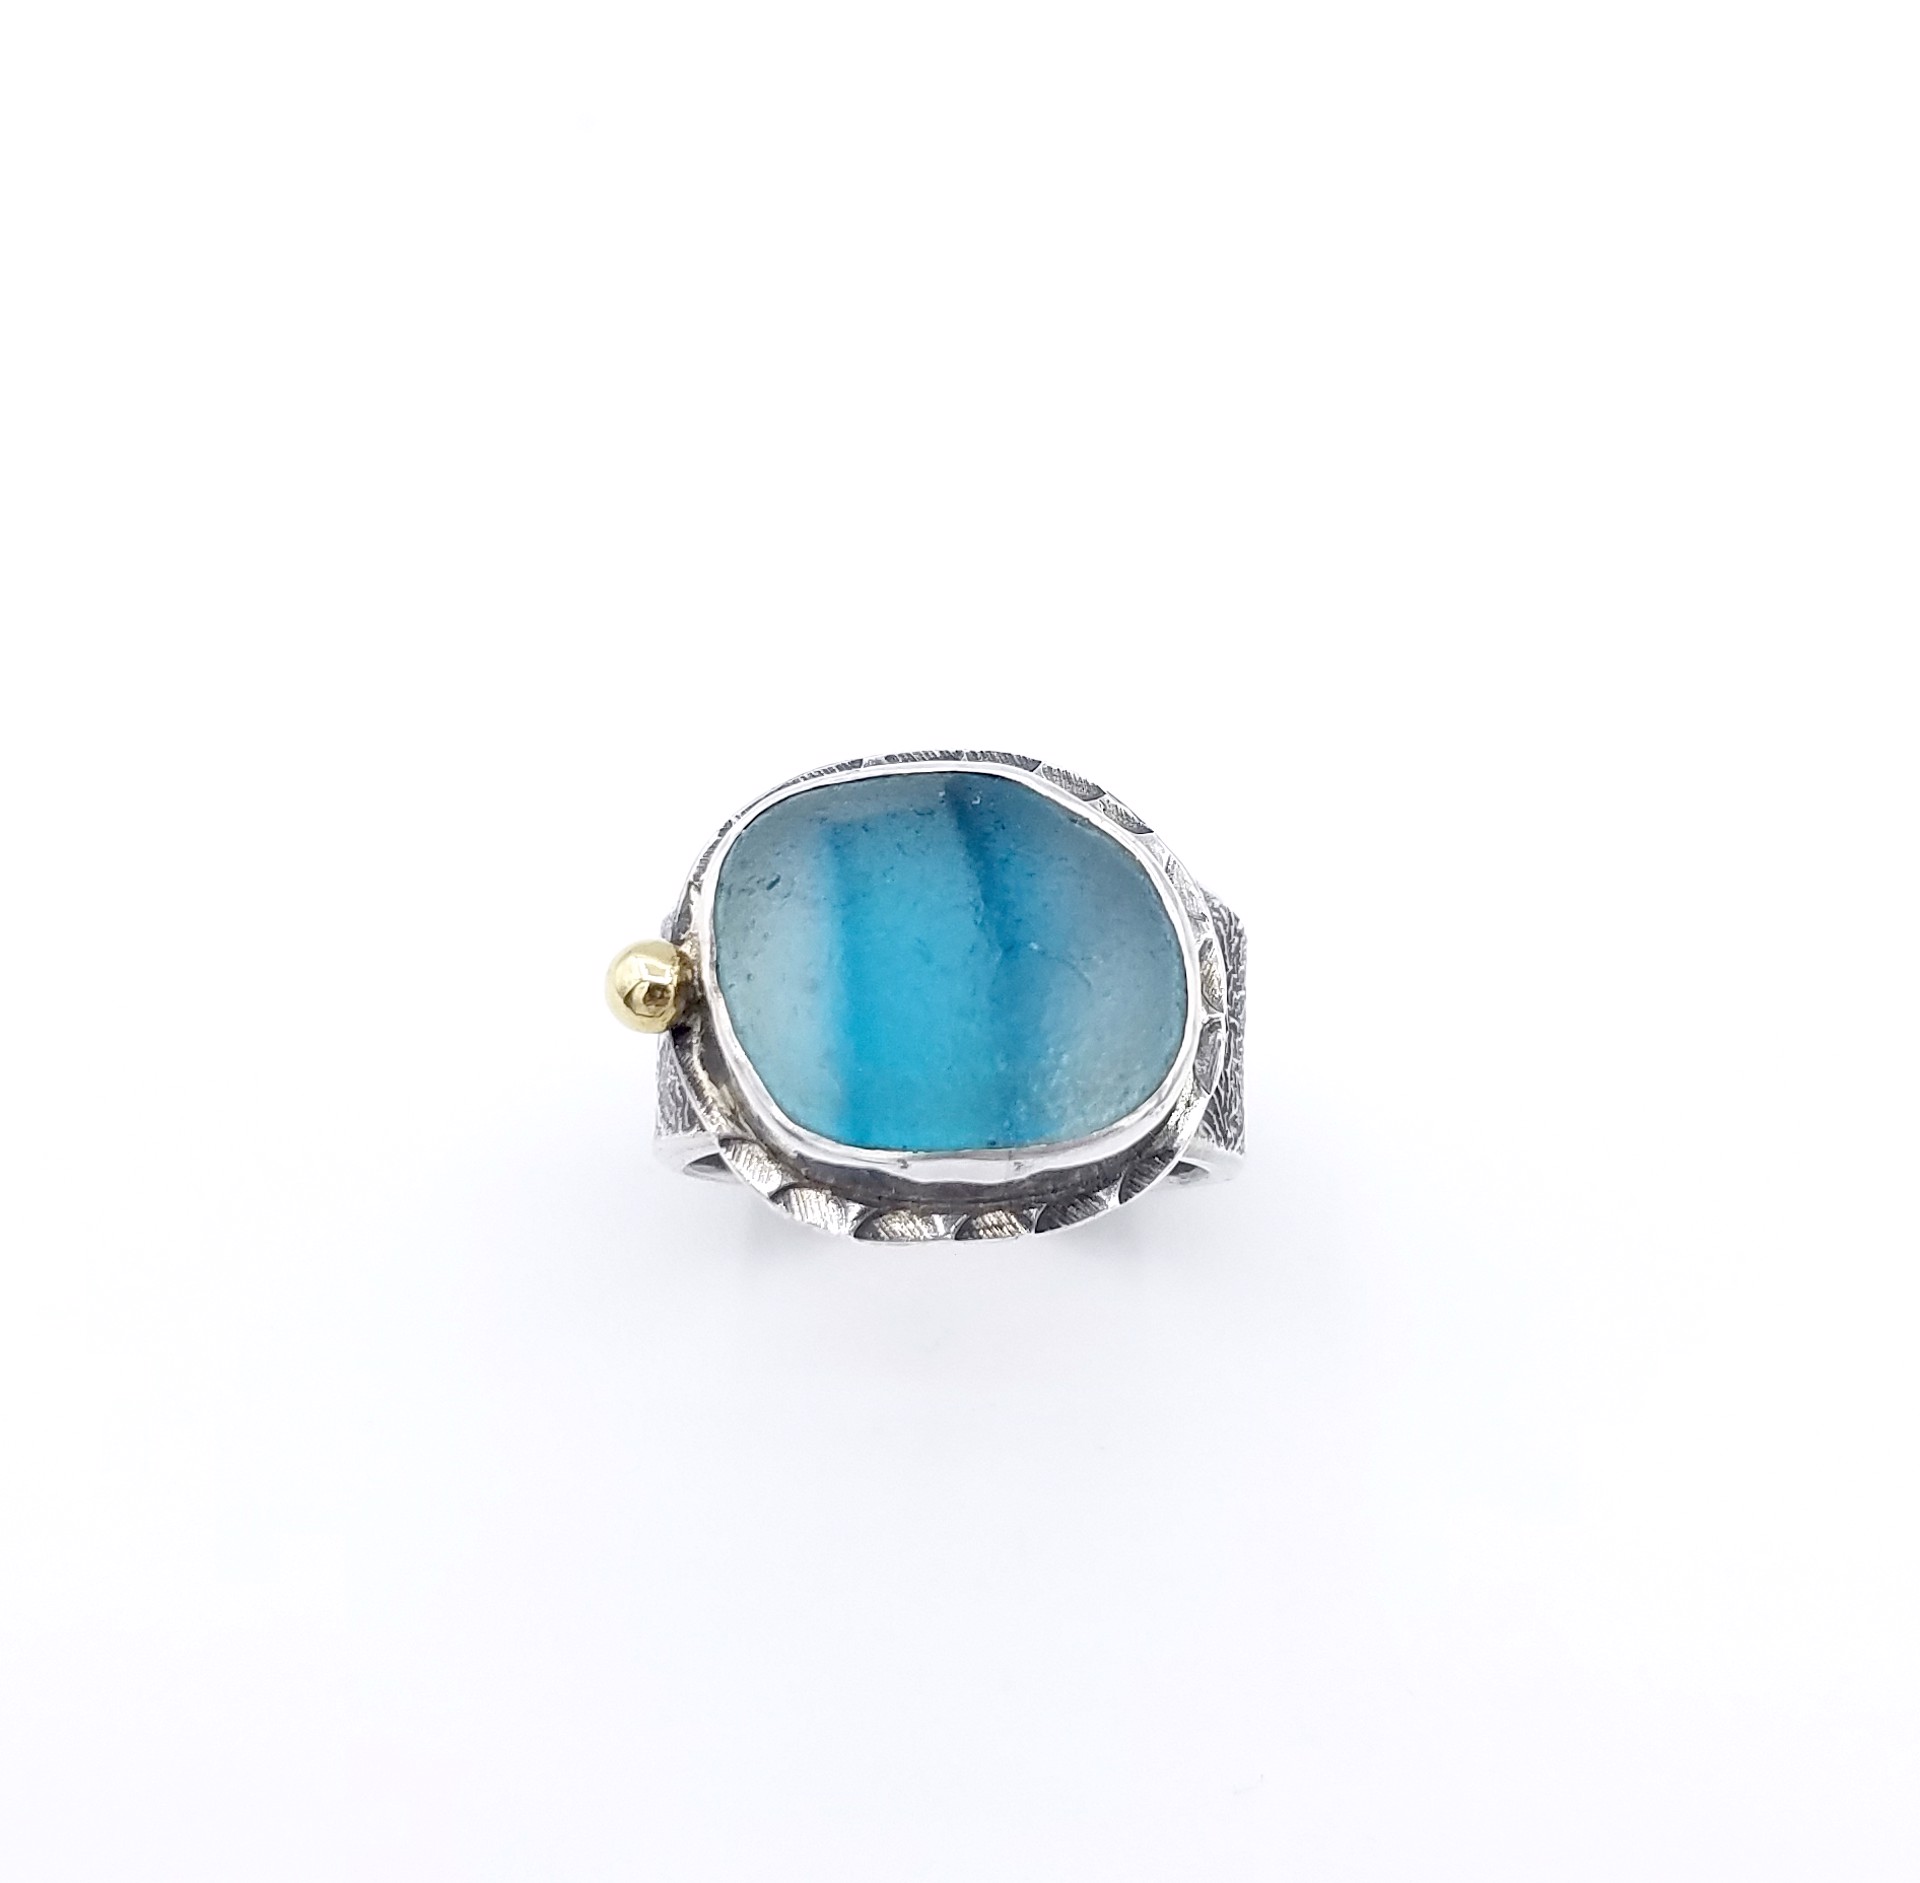 Blue Stripe Seaglass Ring with Gold Dot Ring by Judith Altruda